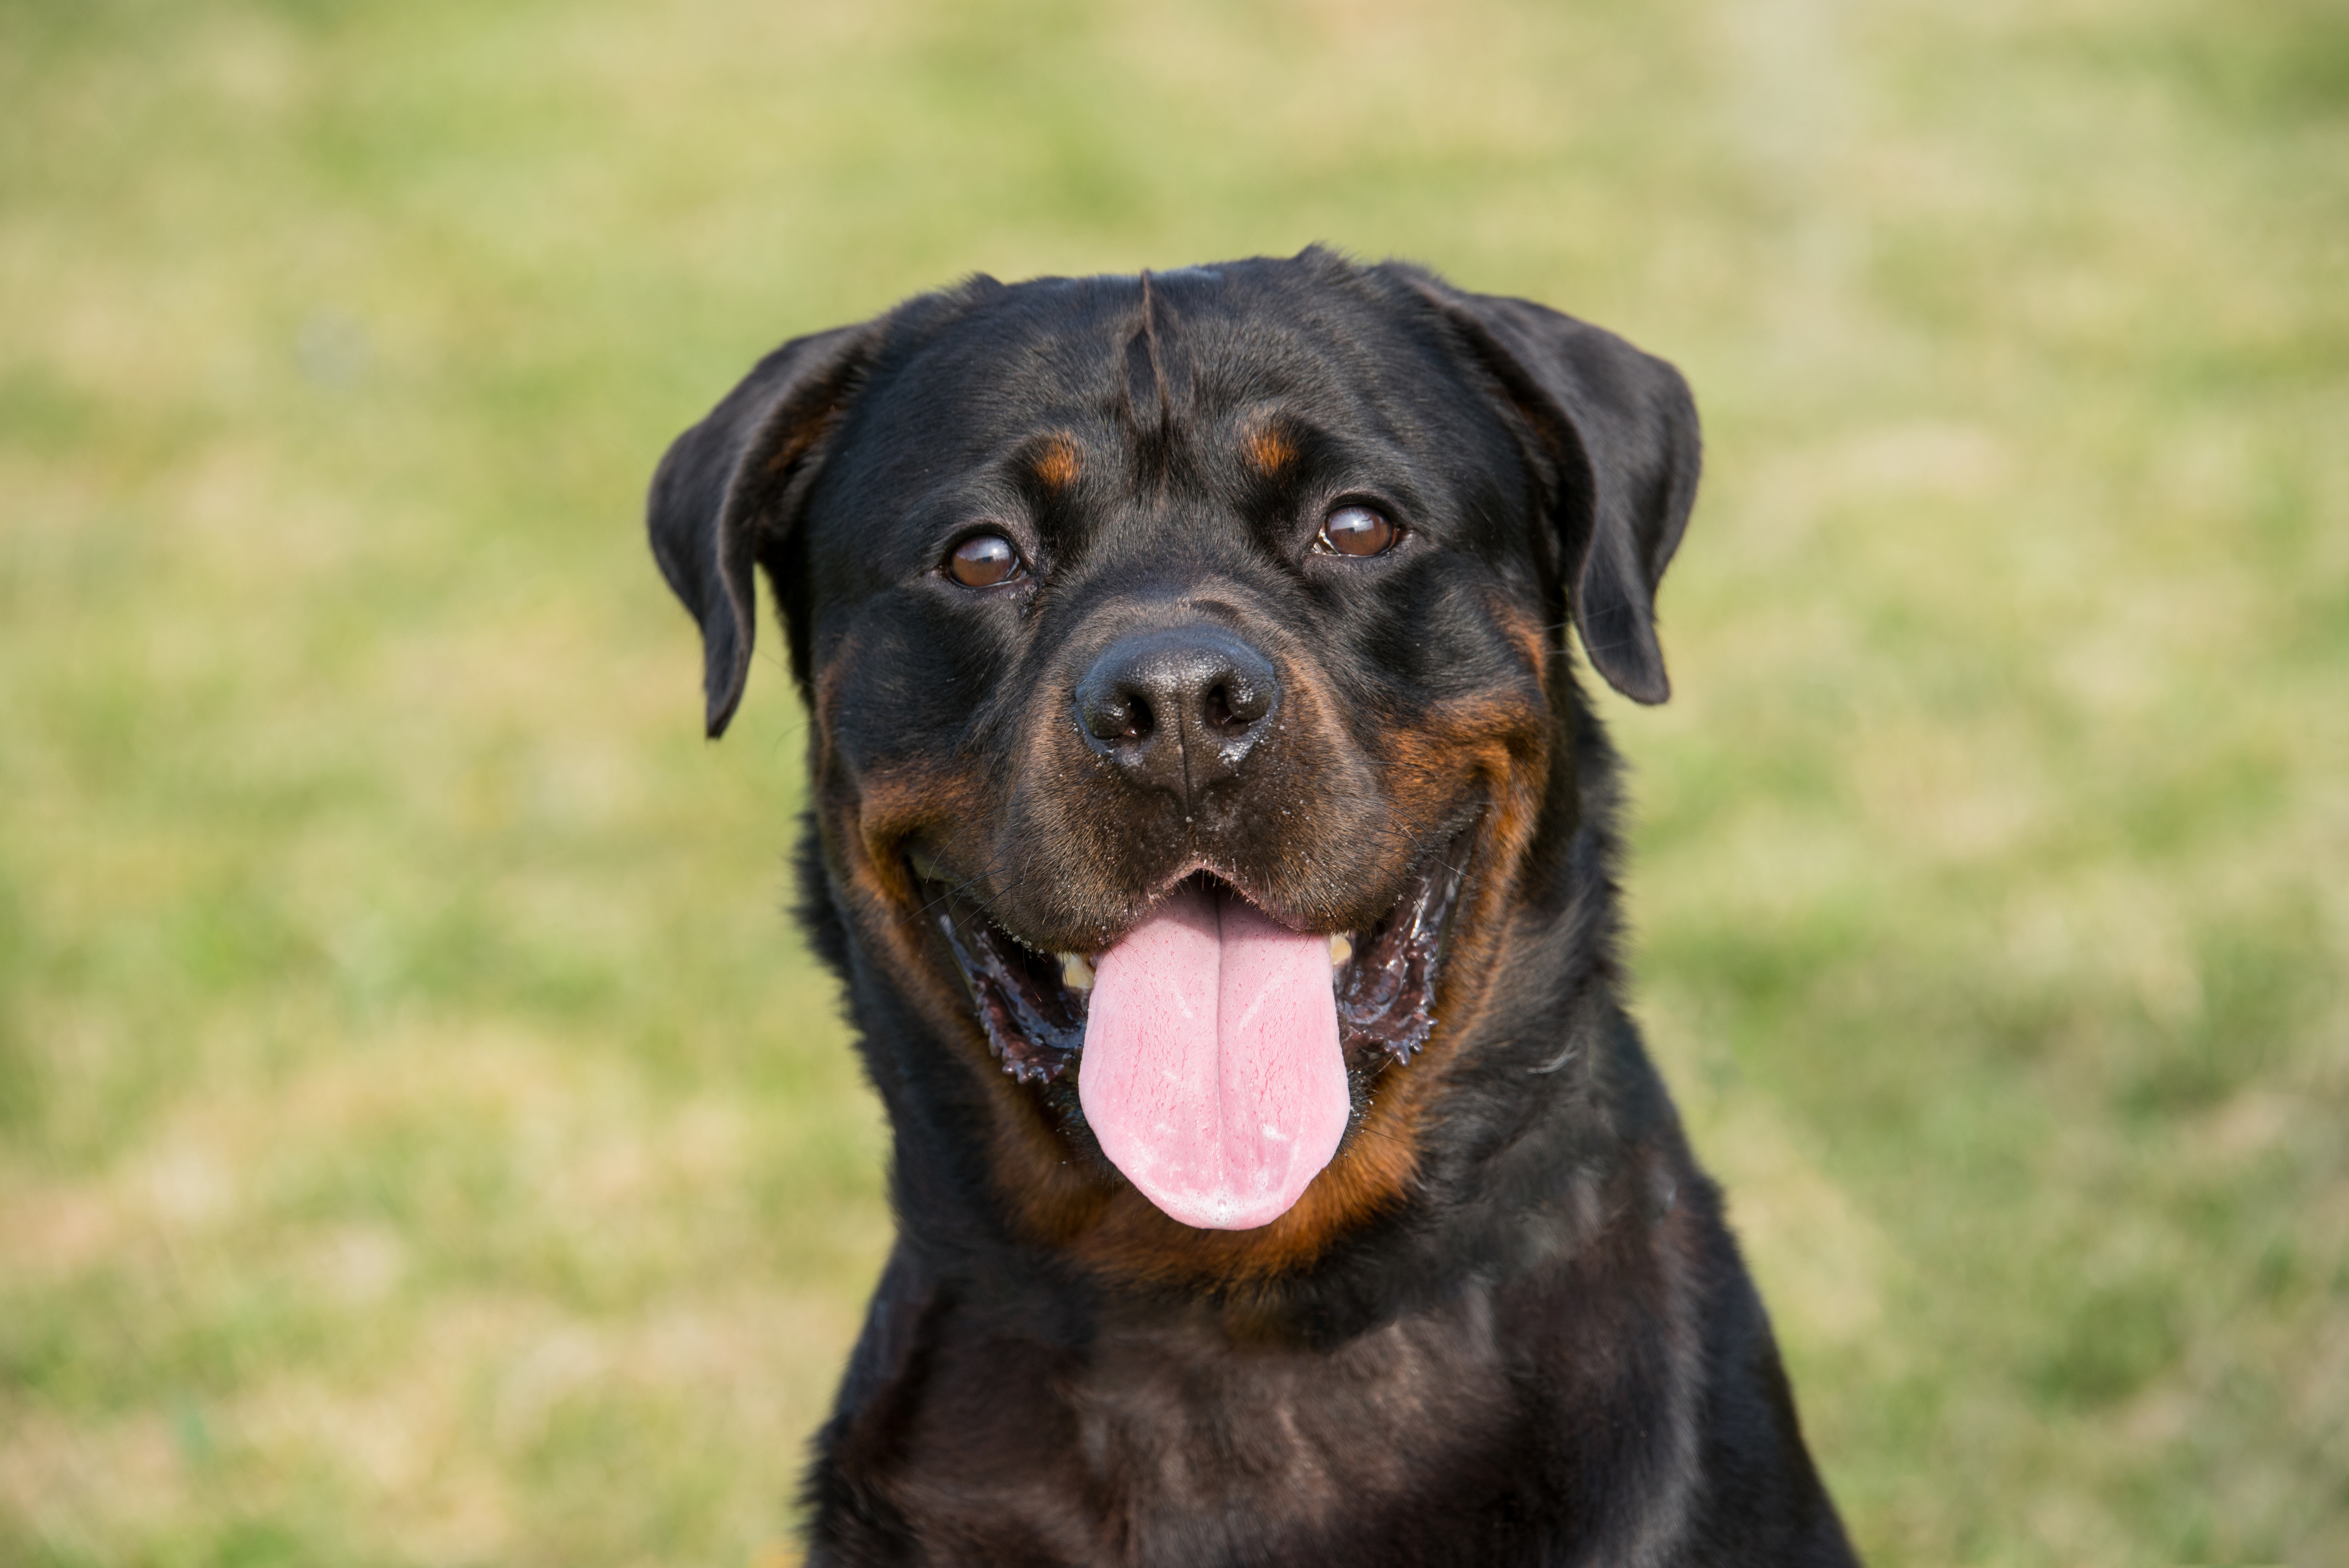 smiling rottweiler, tongue out, outdoors, looking to camera